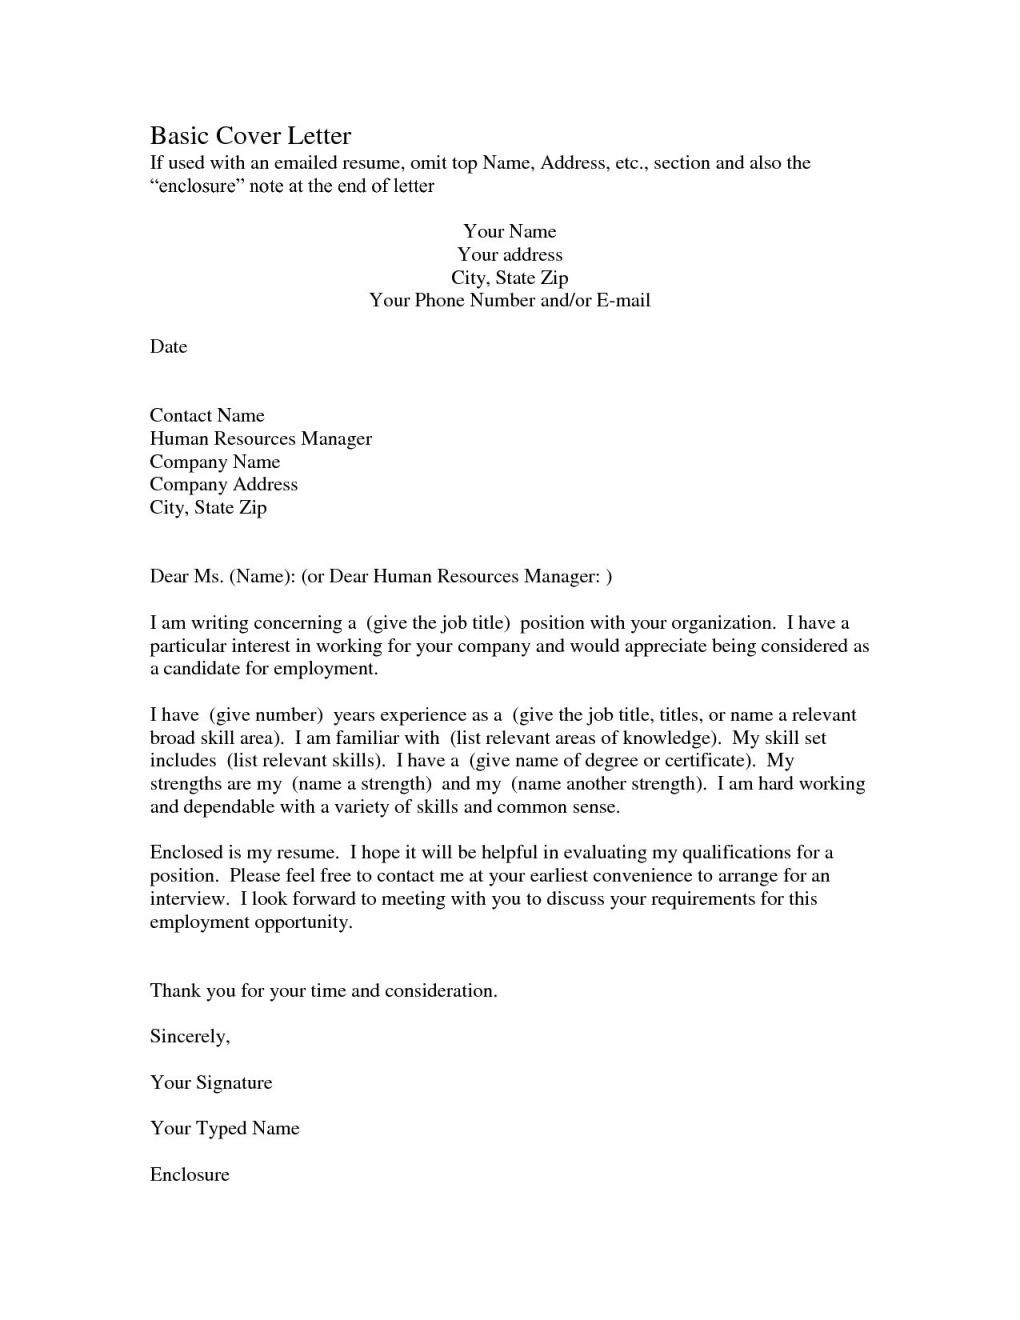 Solicitation Letter Template - Fresh How to Write A solicitation Letter Xi84 – Documentaries for